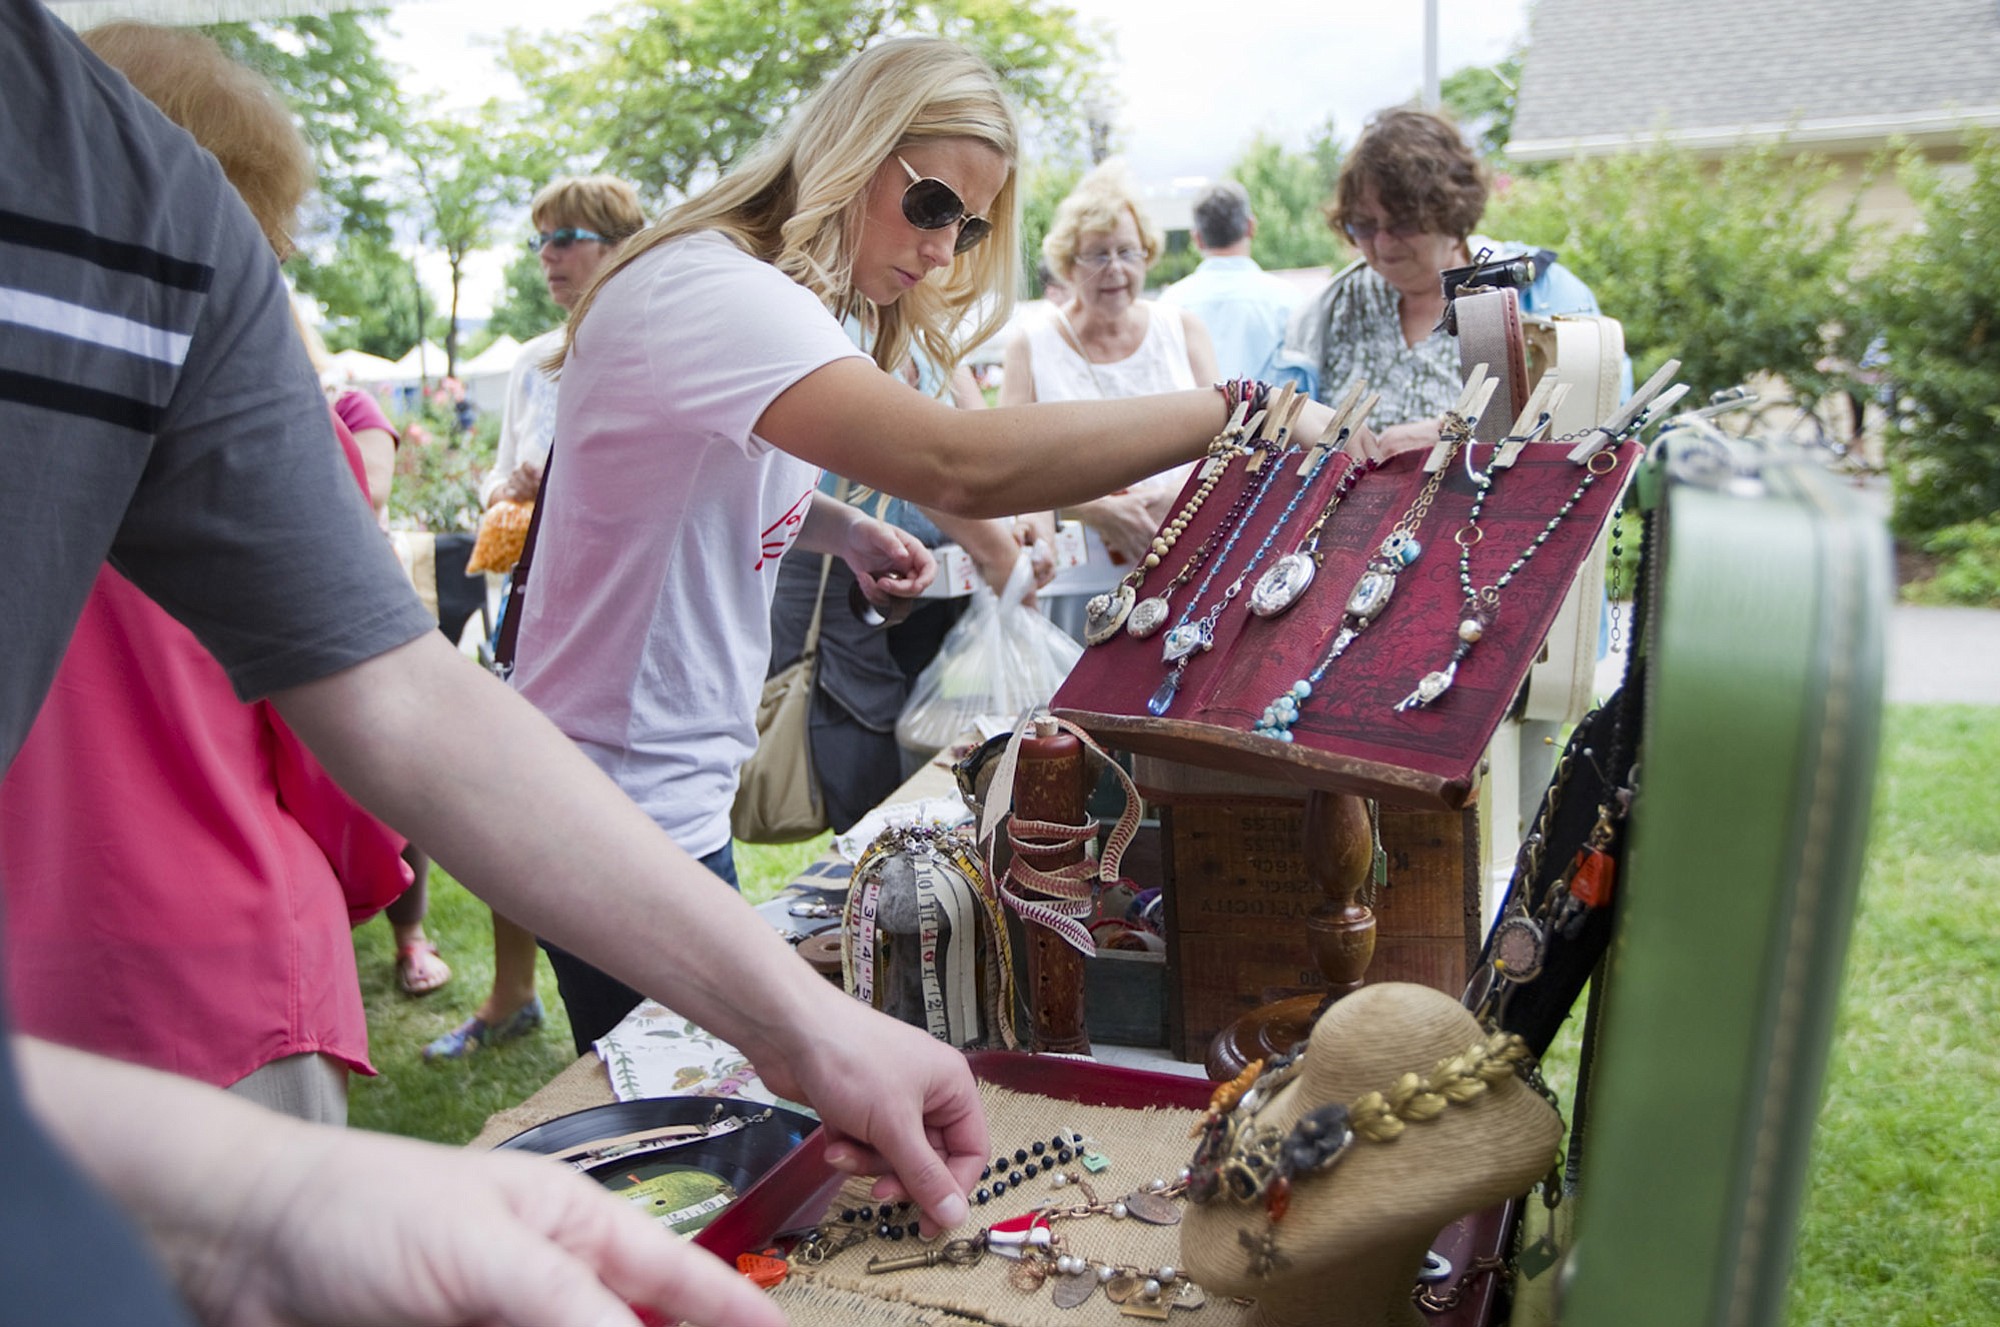 At the Recycled Arts Festival on Sunday, Sara Turner of Vancouver, center, looks at jewelry made from recycled items.